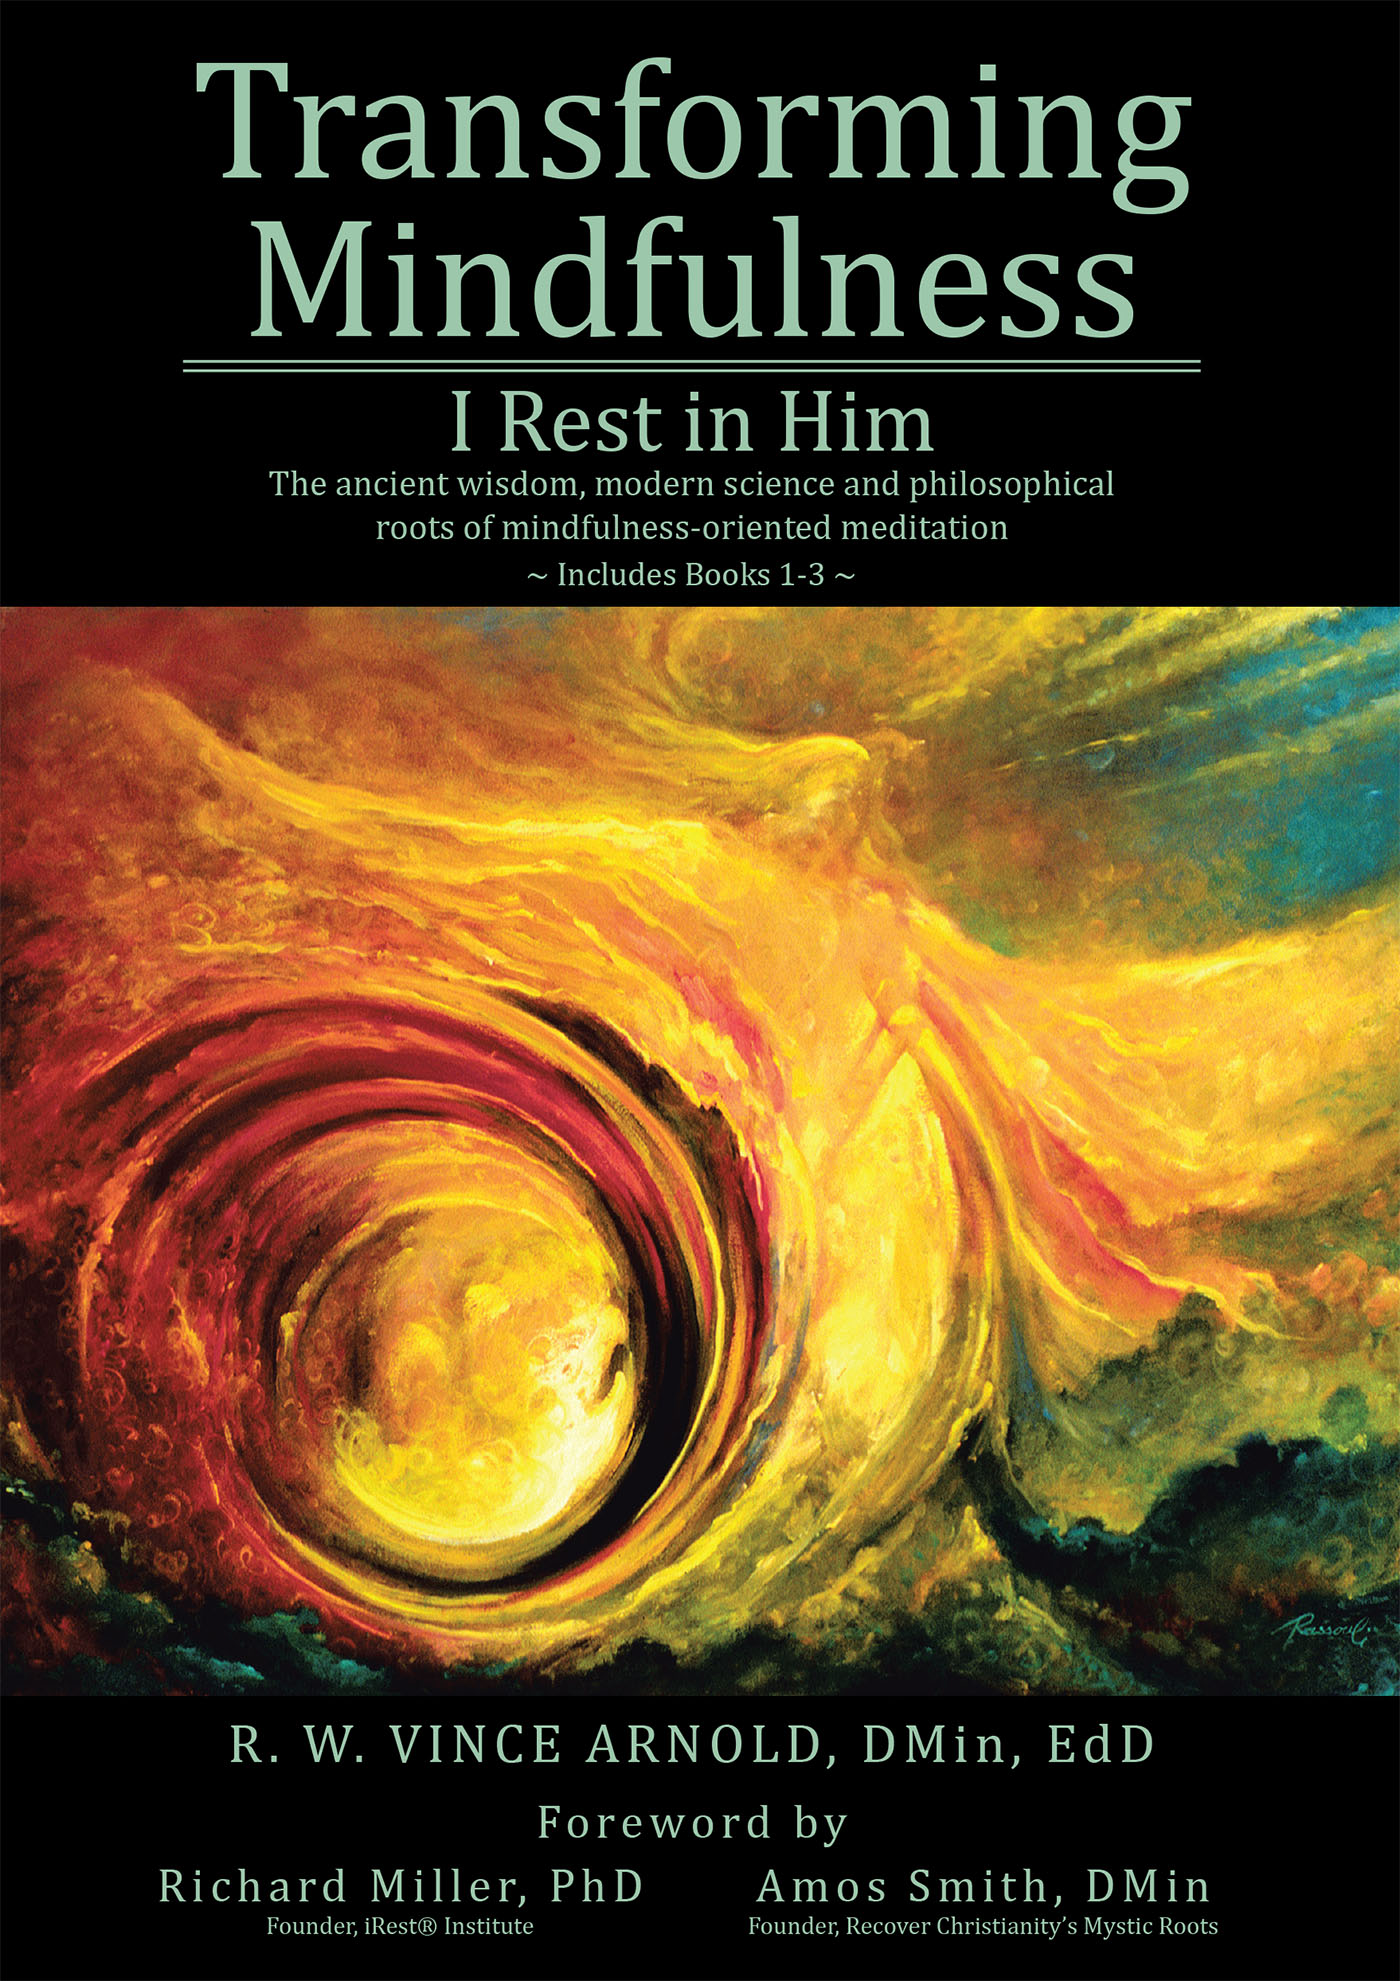 R. W. Vince Arnold, DMin, EdD’s Newly Released “Transforming Mindfulness: I Rest in Him” is a Scholarly and Practical Resource for Enhancing Resilience and Well-Being